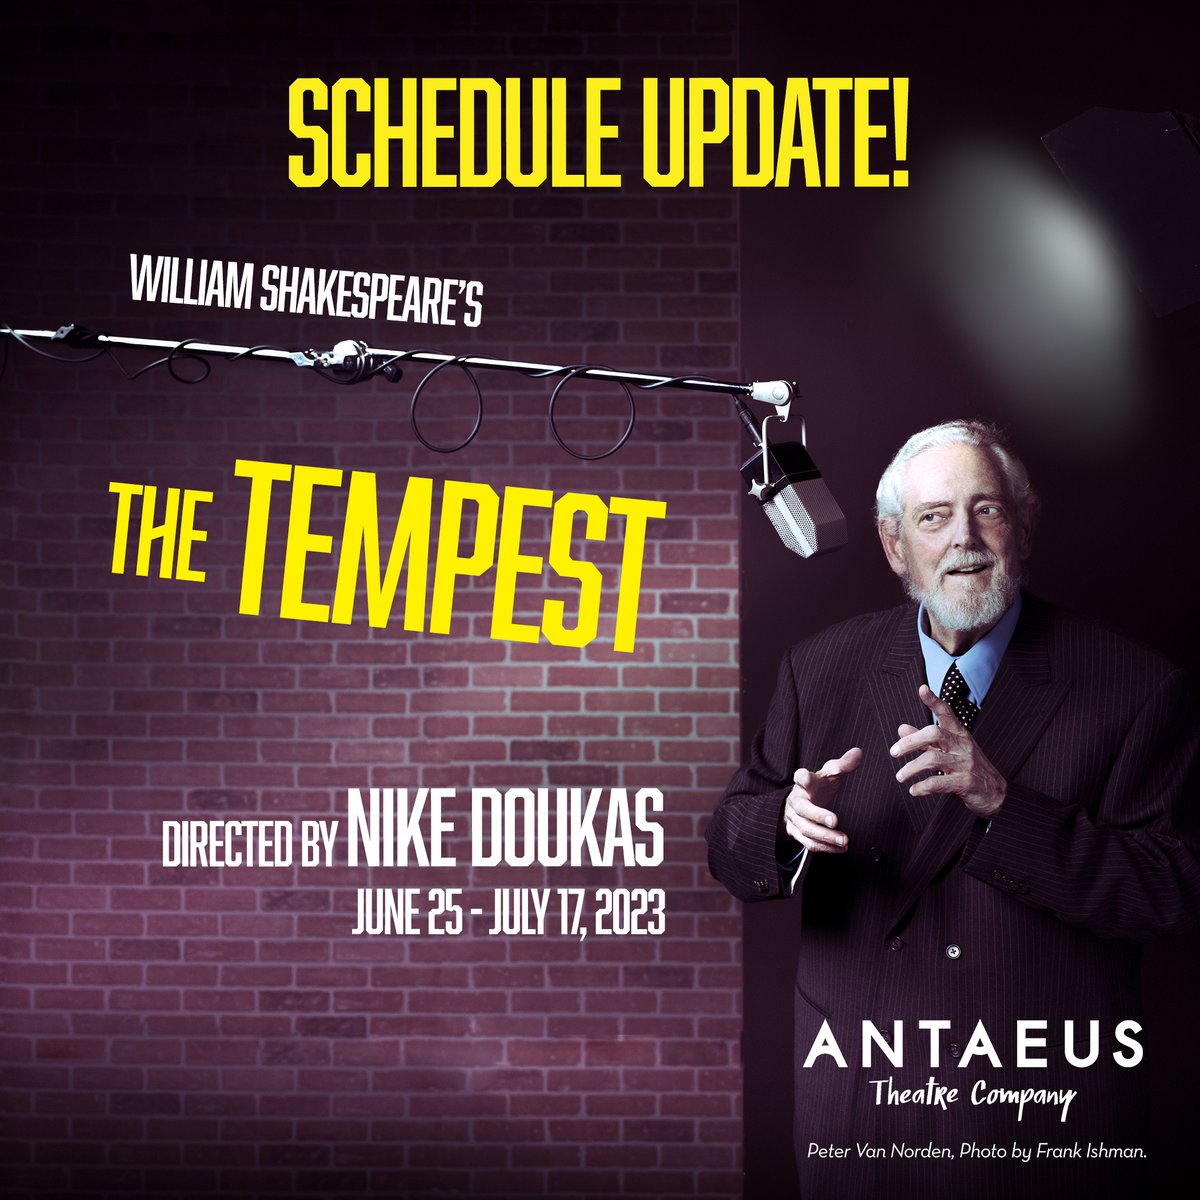 🚨 SCHEDULE UPDATE 🚨 Due to illness, we have adjusted our performance schedule for The Tempest. We now have an extremely limited run you can view here: ci.ovationtix.com/35088/producti… We can't wait to share the magic of The Tempest with you 🌊🏝 We promise it will be worth the wait!